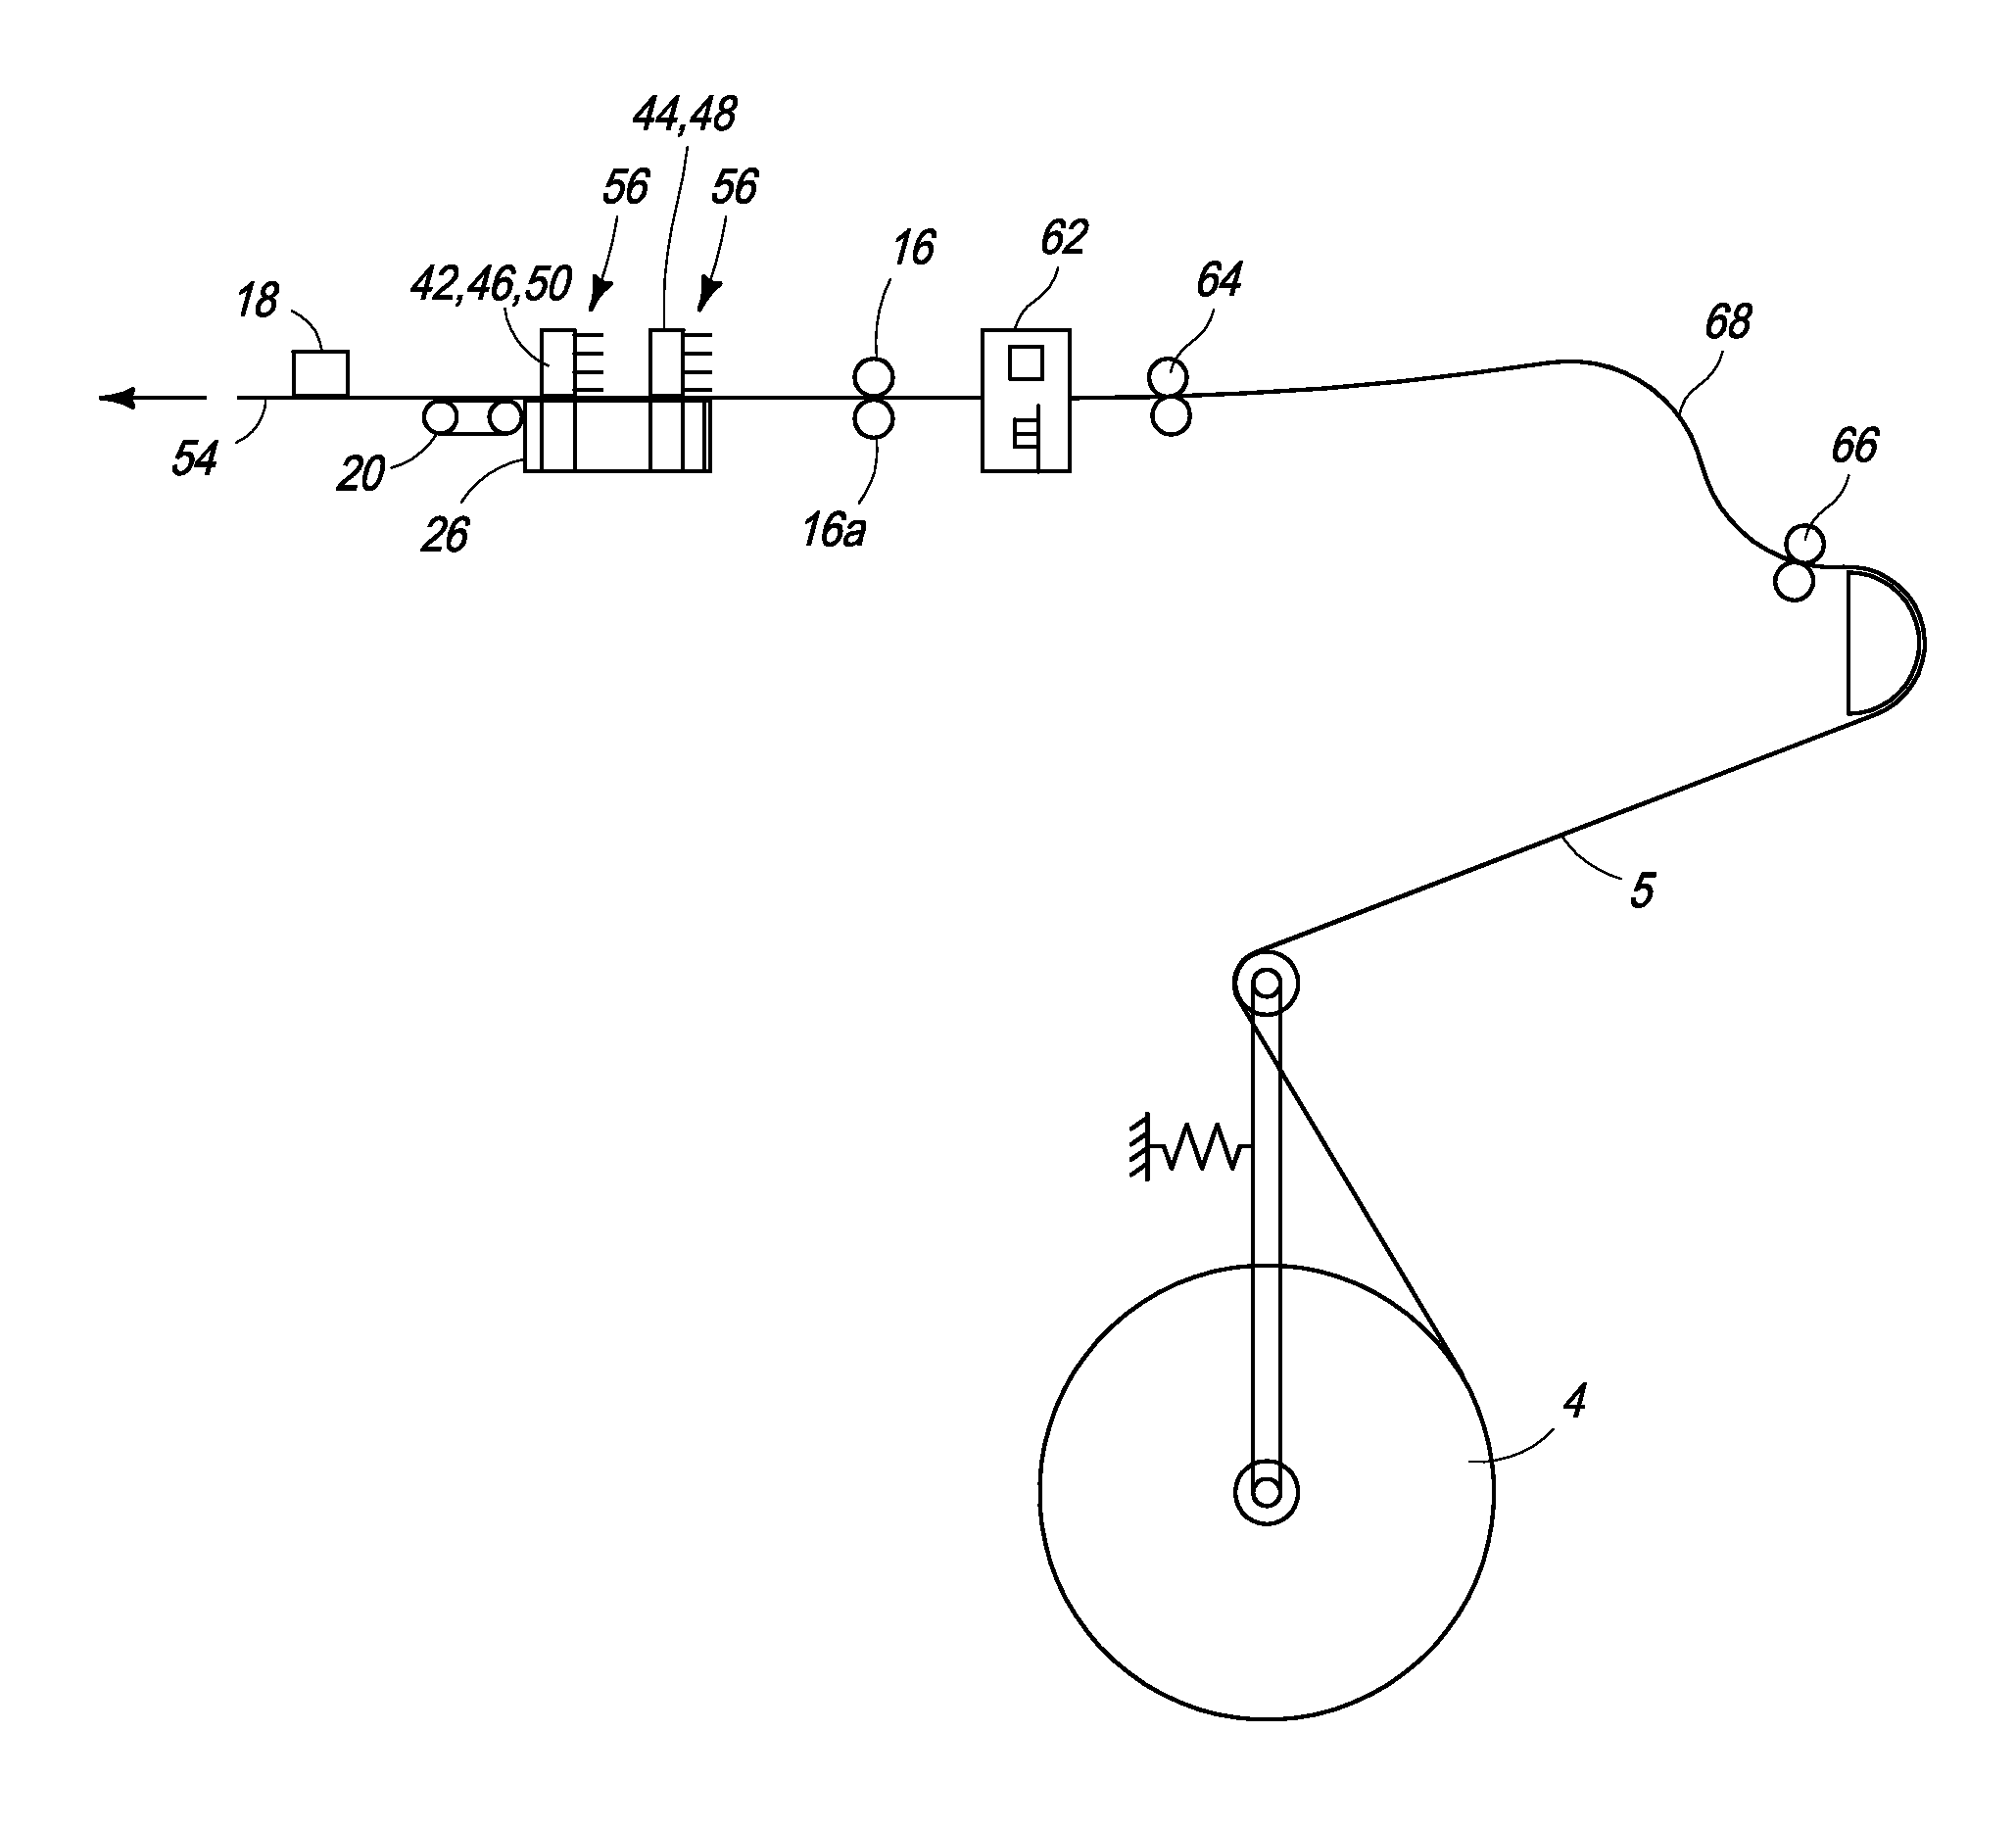 Printer with vacuum belt assembly having non-apertured belts